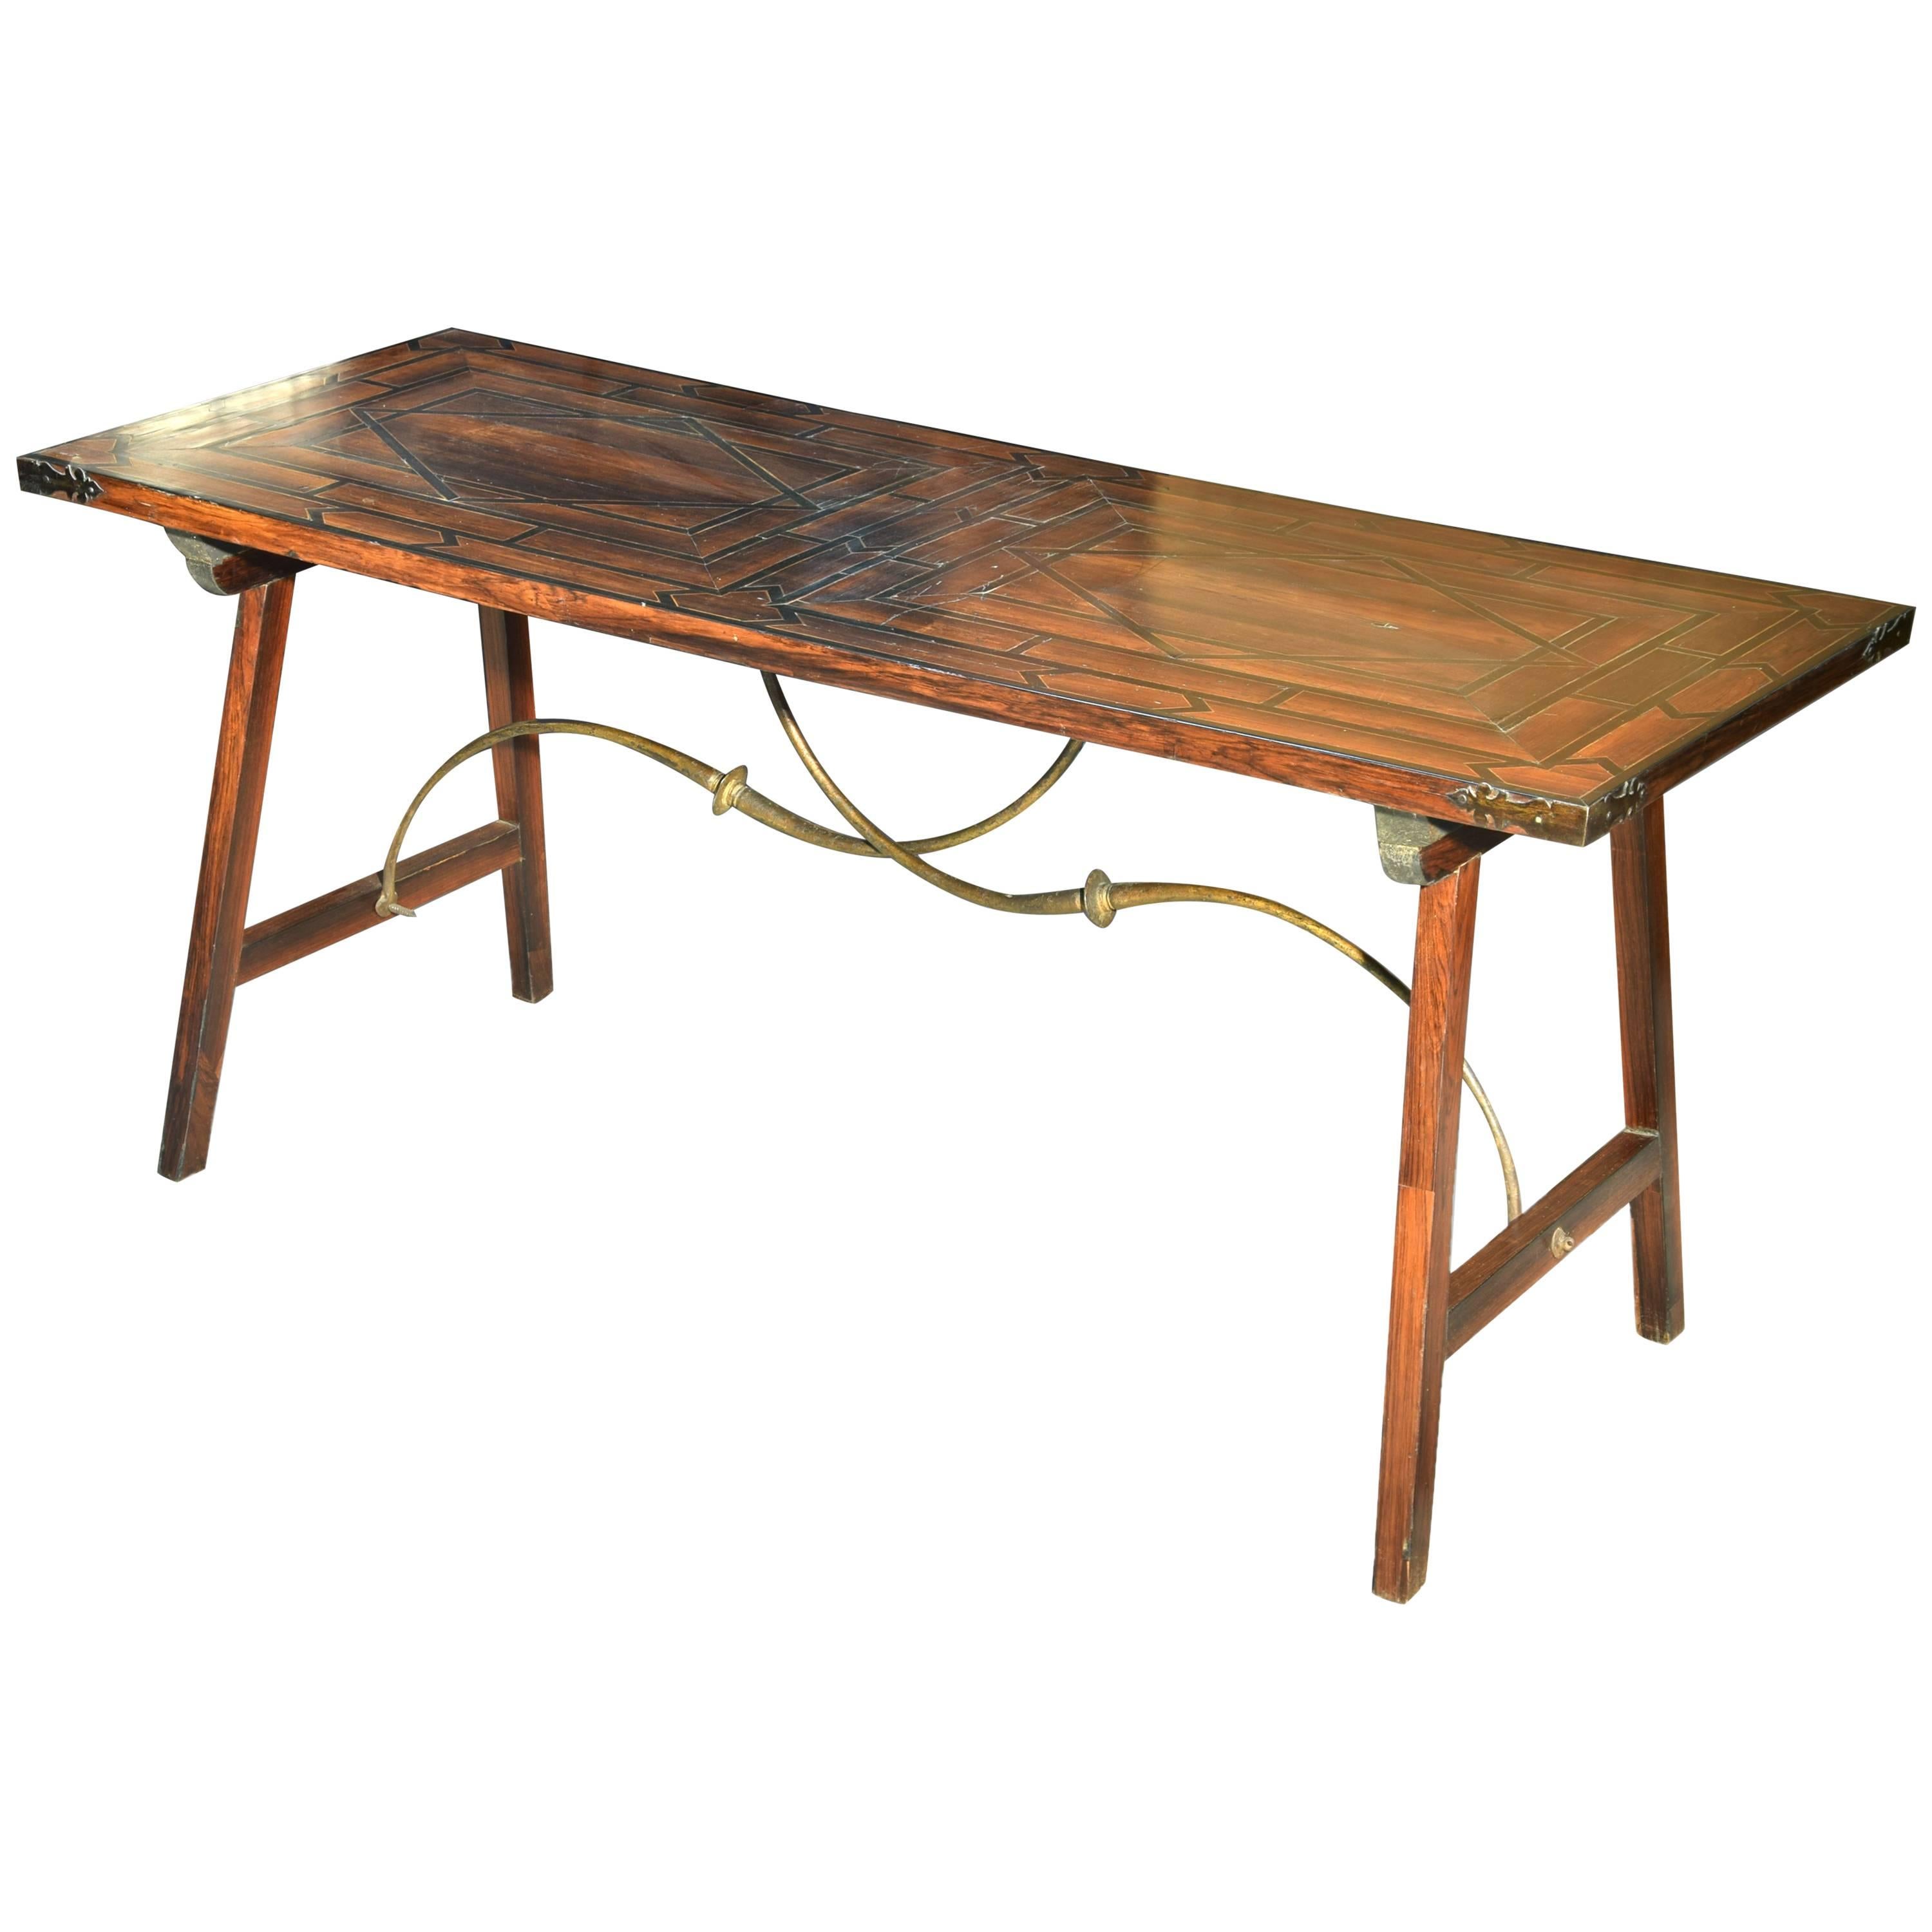 Table for Spanish Desk, Rosewood, Wood, Wrought Iron, Spain, 18th Century For Sale